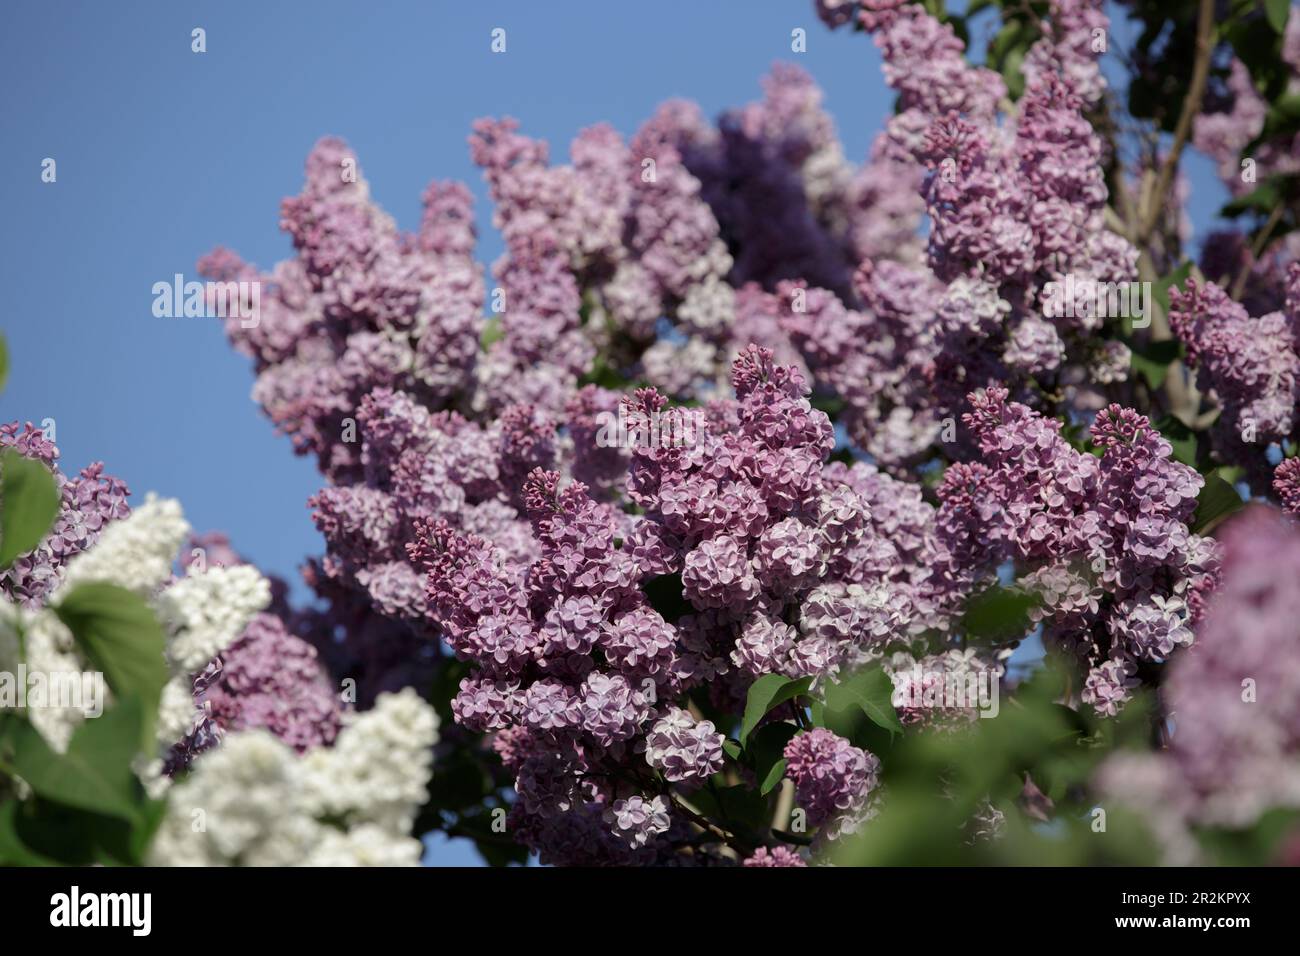 Lilac bush. Branch of lilac branches. Beautiful lilac flowers. Purple common lilac blossom beautiful flowers. Bright blooms of spring lilacs bush Stock Photo